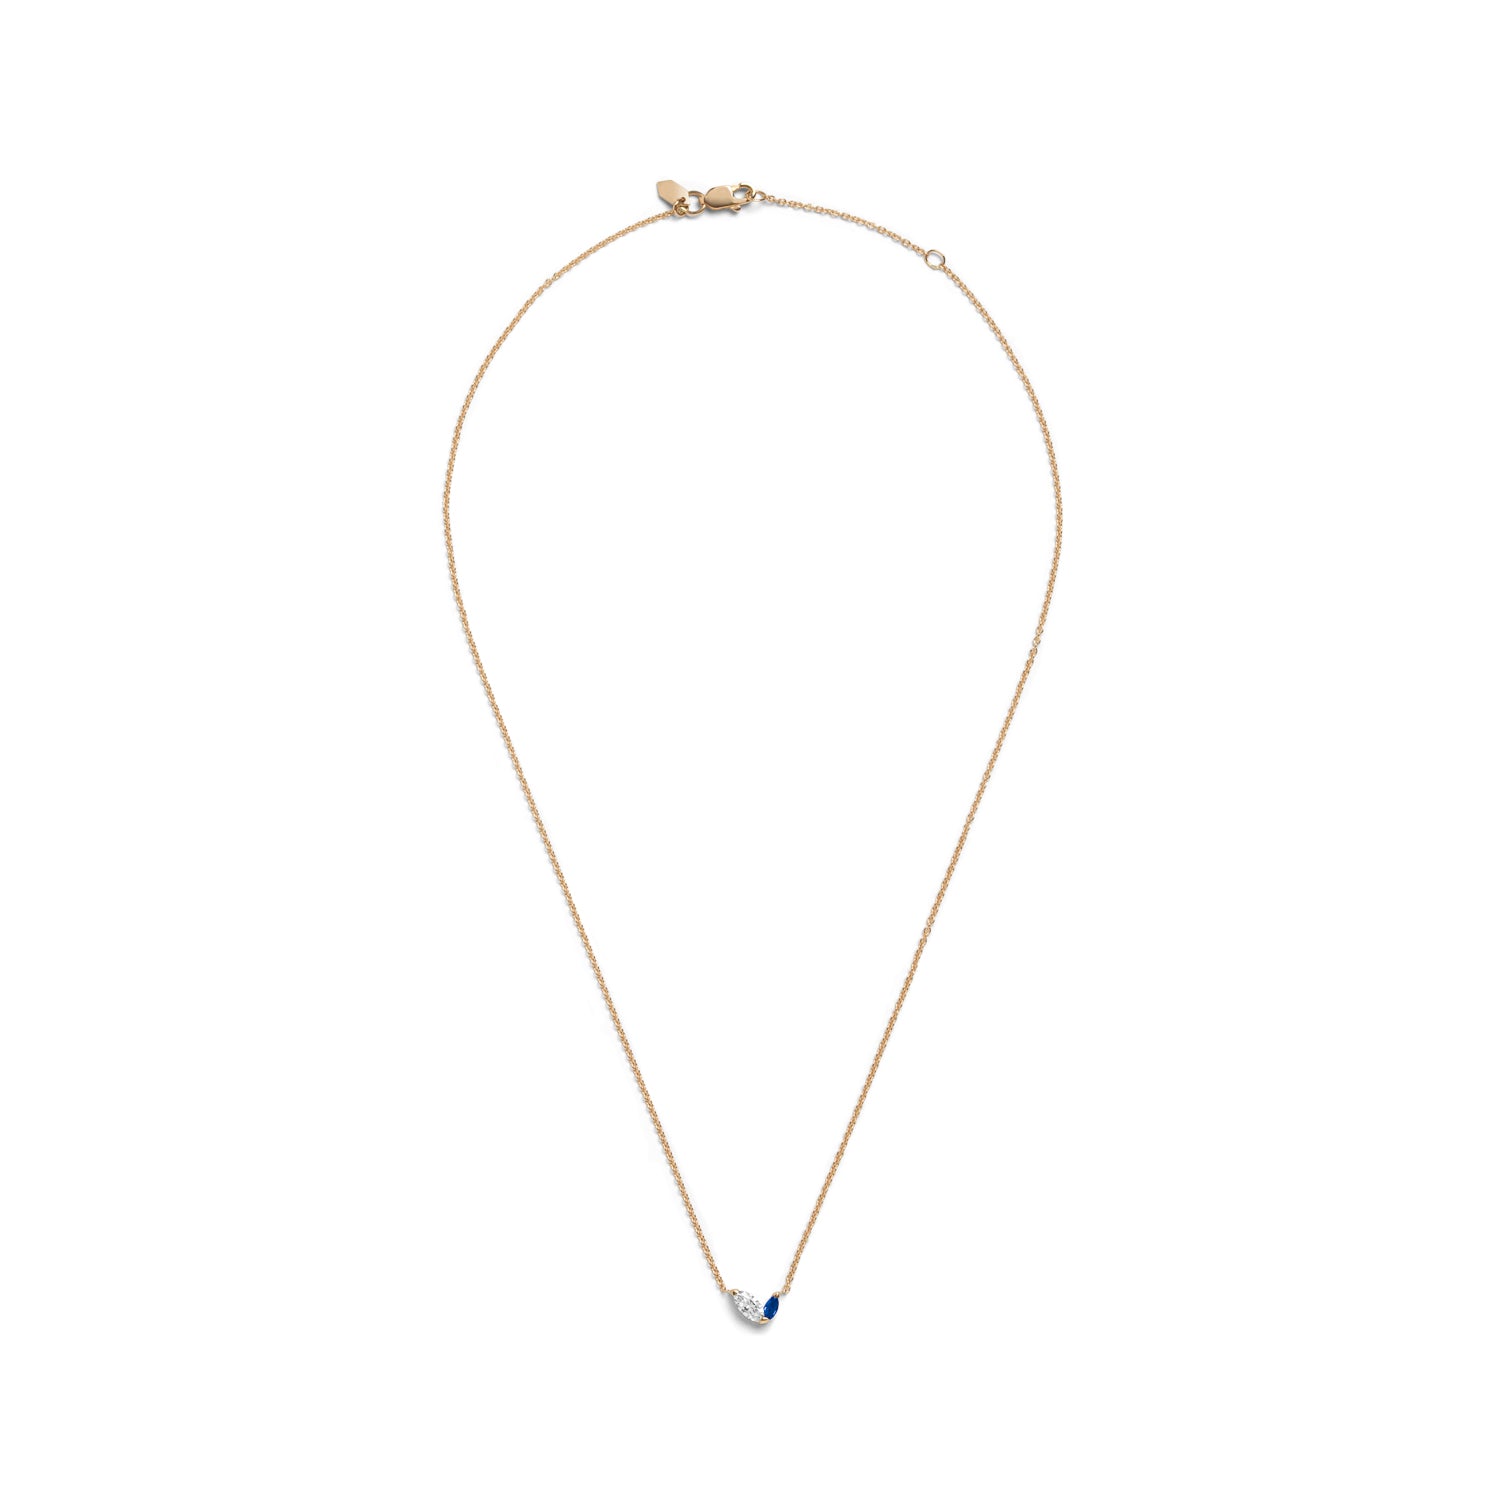 Selin Kent 14K Defne Necklace with Offset Marquise White Diamond and Offset Marquise Sapphire